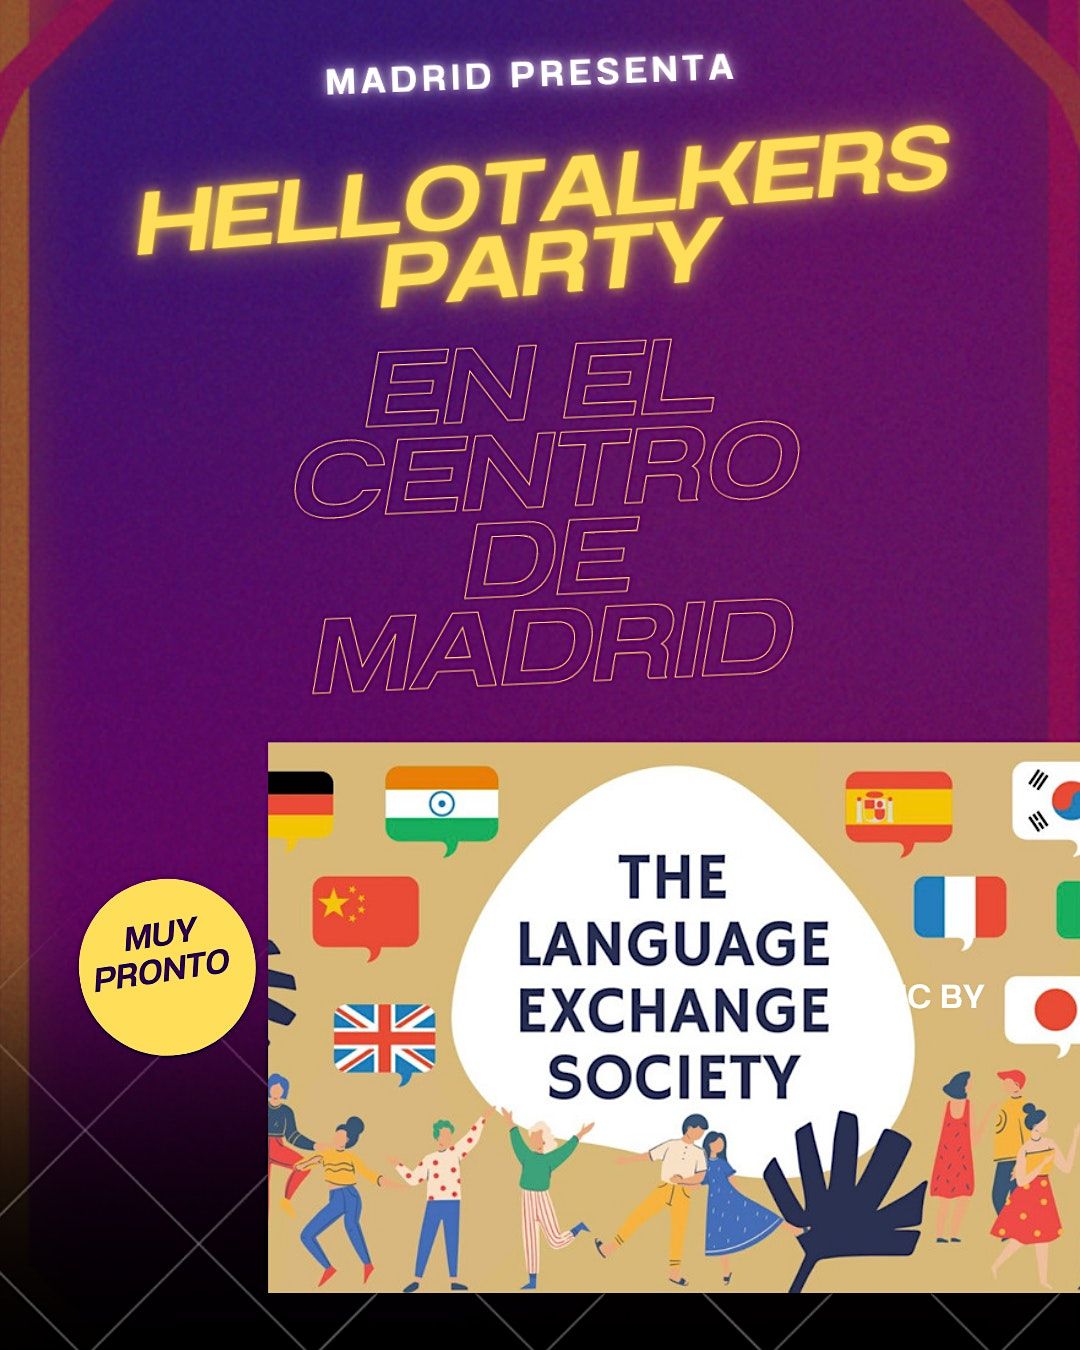 Hellotalkers party